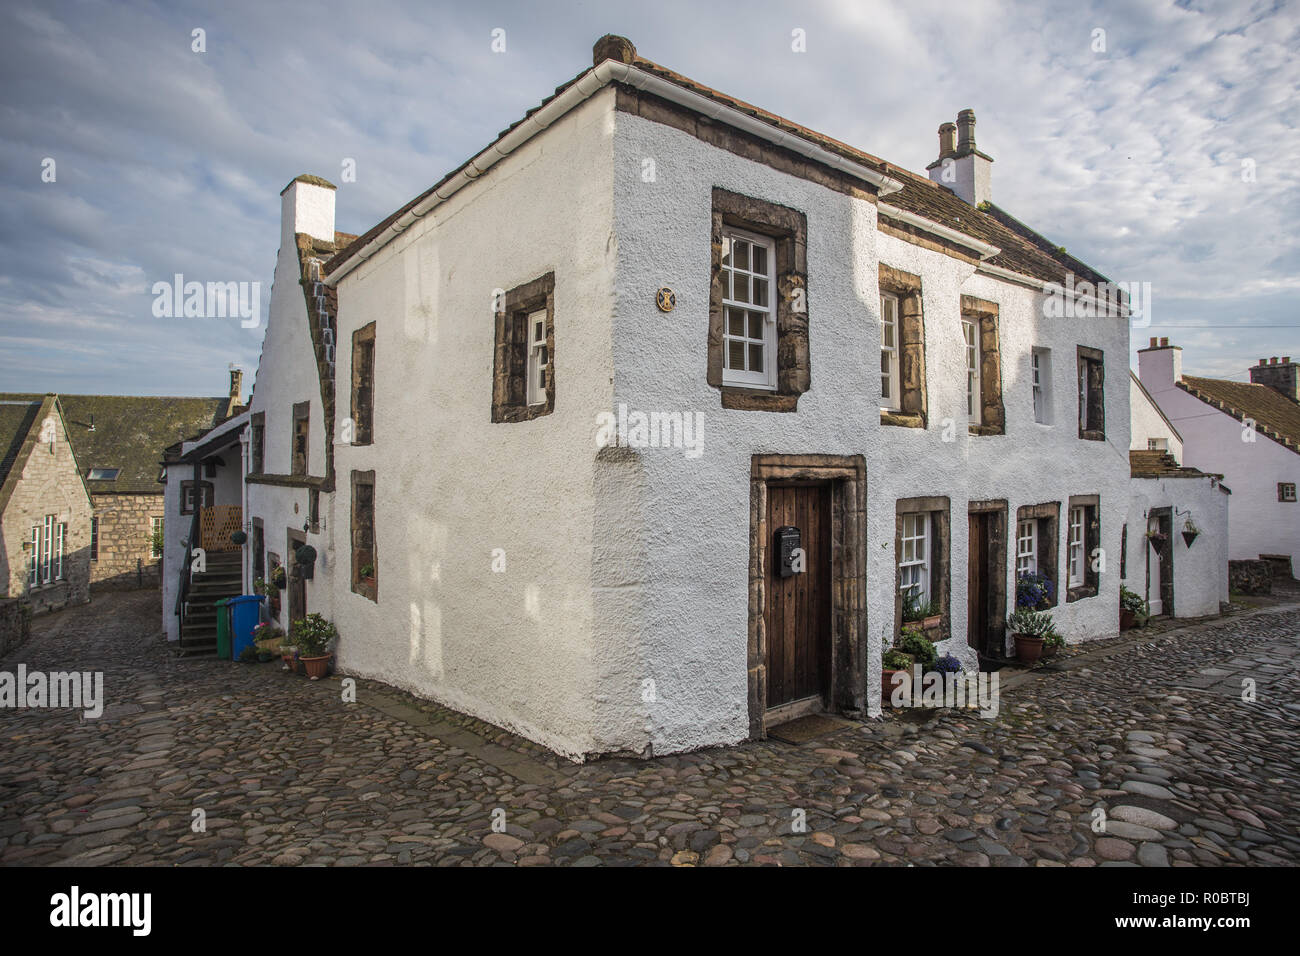 The town of Culross is a former royal burgh in Fife, Scotland. Stock Photo